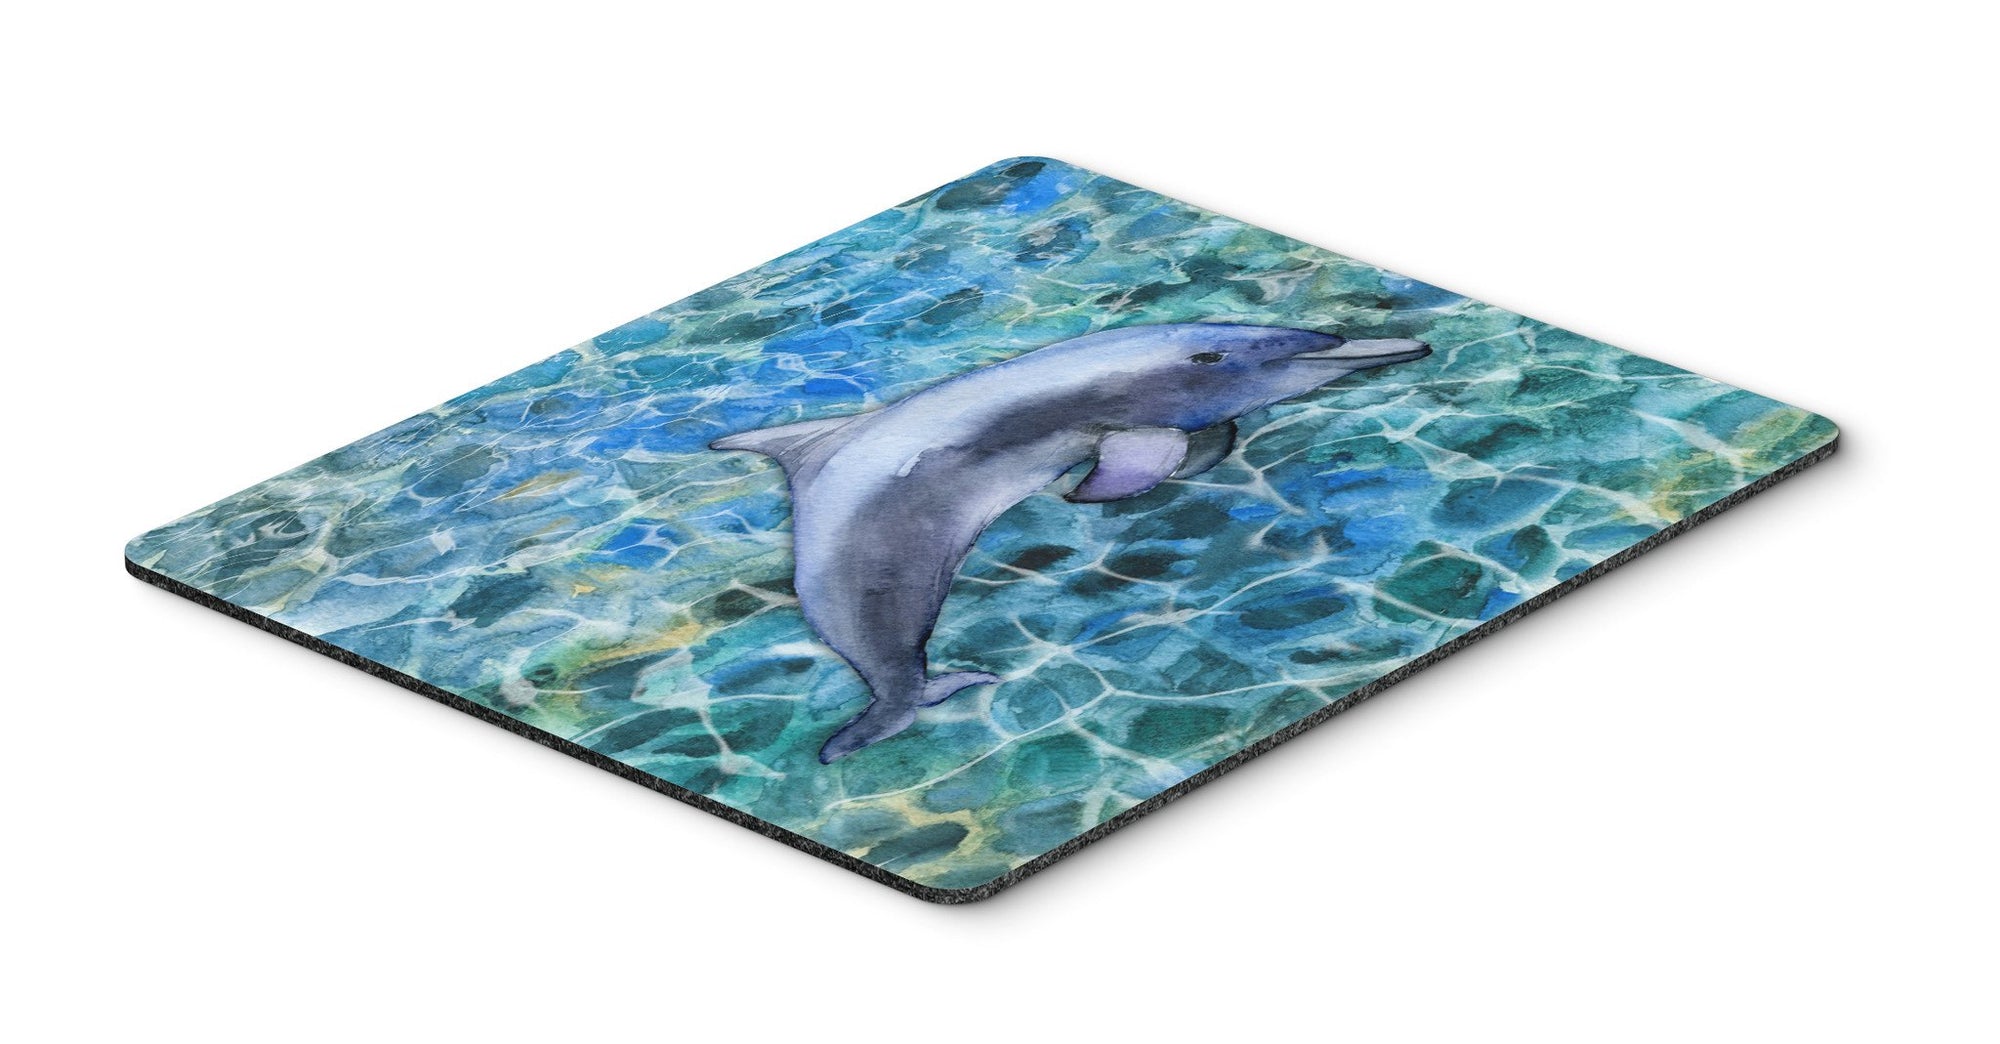 Dolphin Mouse Pad, Hot Pad or Trivet BB5339MP by Caroline's Treasures